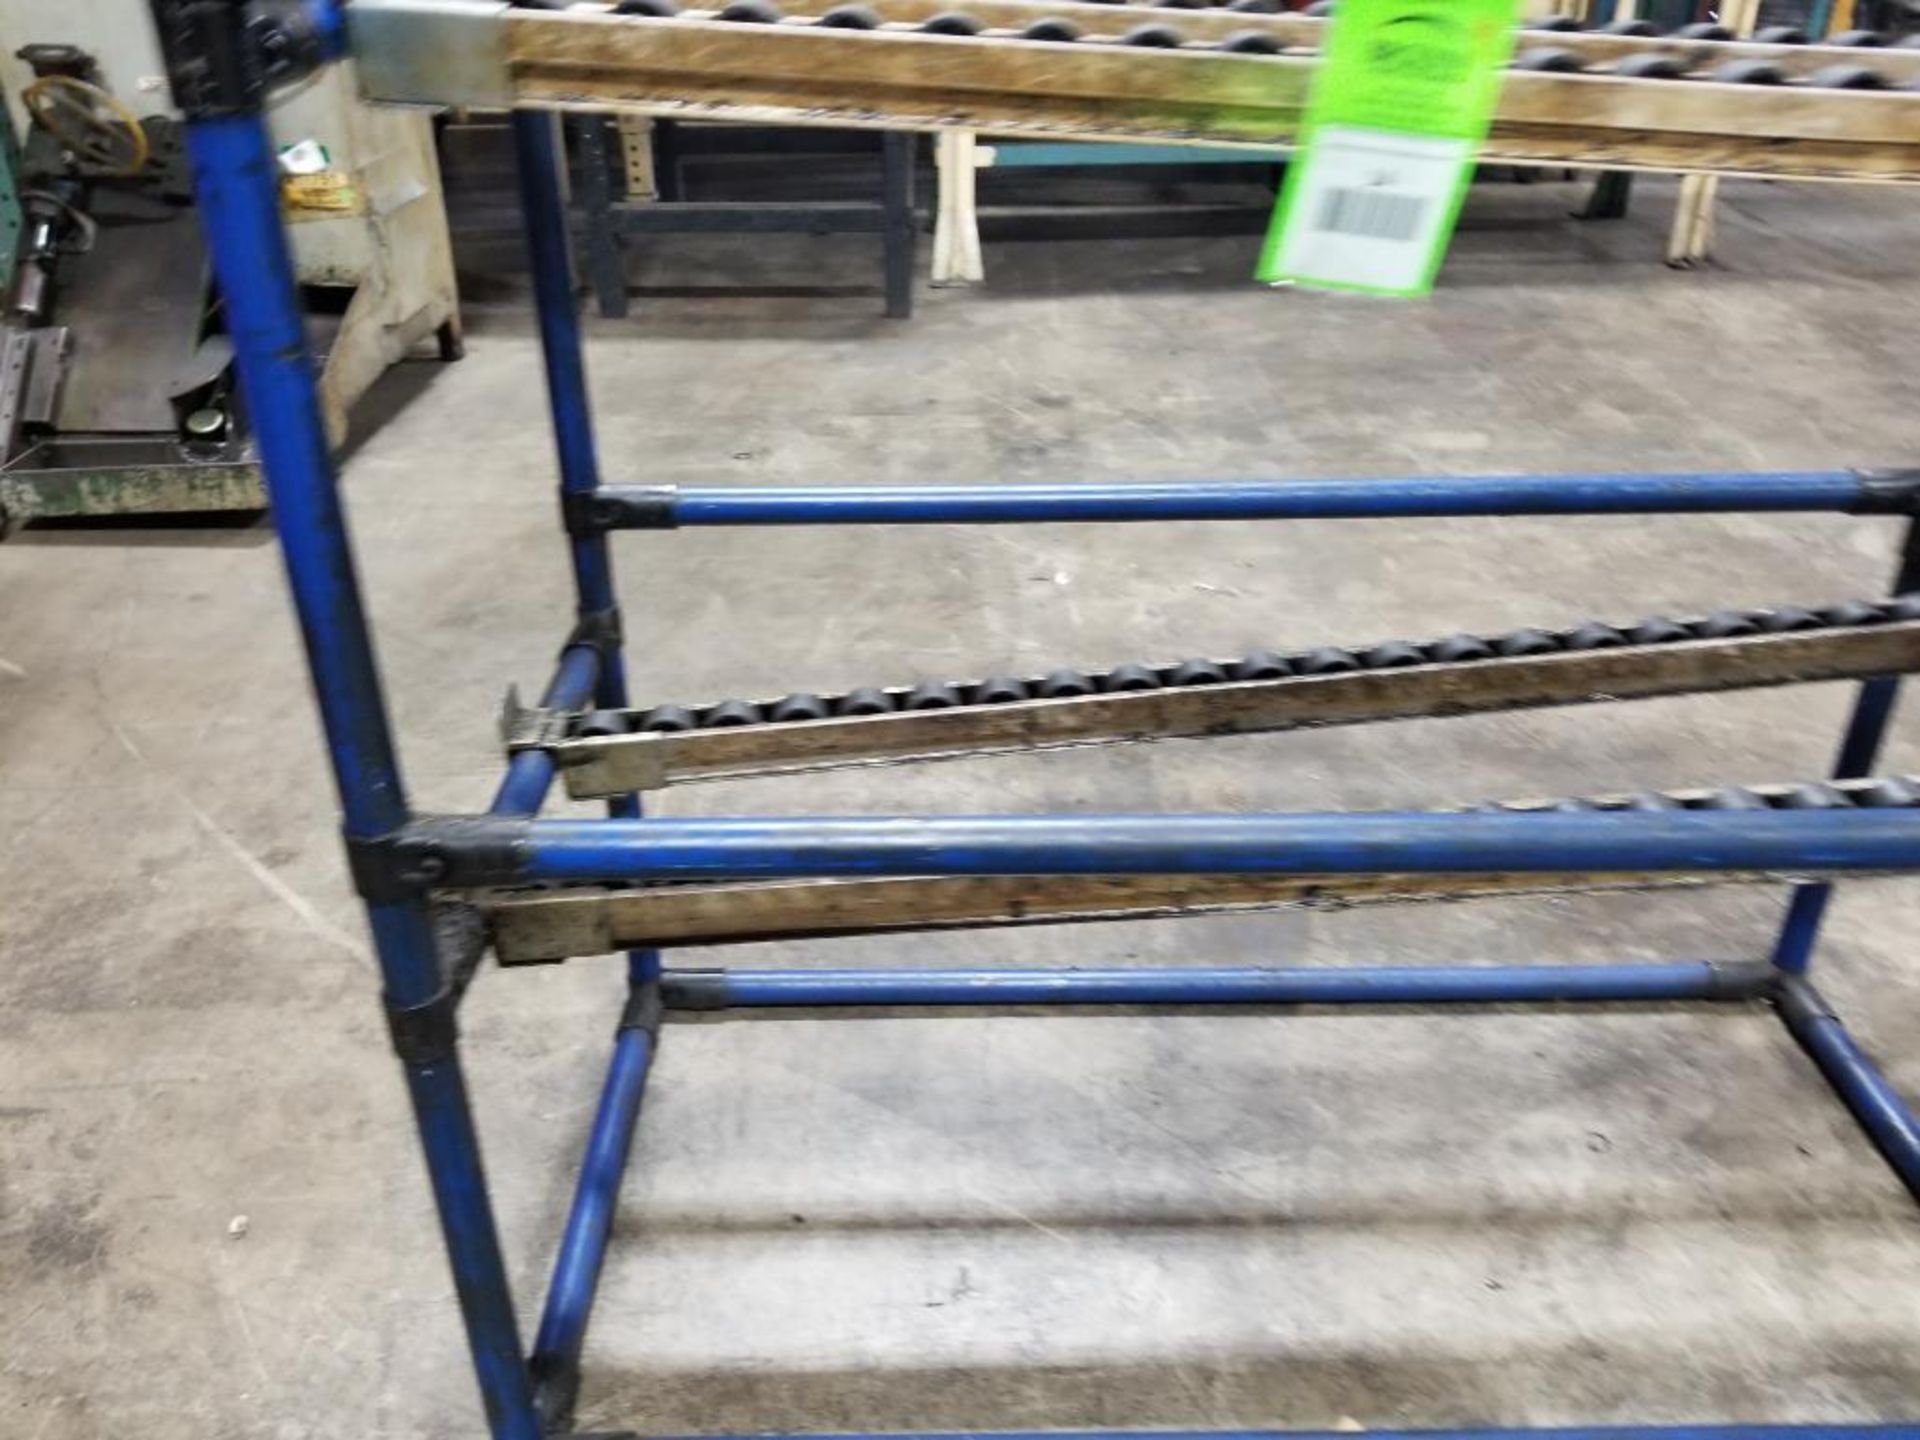 Qty 2 - Two-level roller racks. 39x19x33 each. LxWxH. - Image 5 of 11